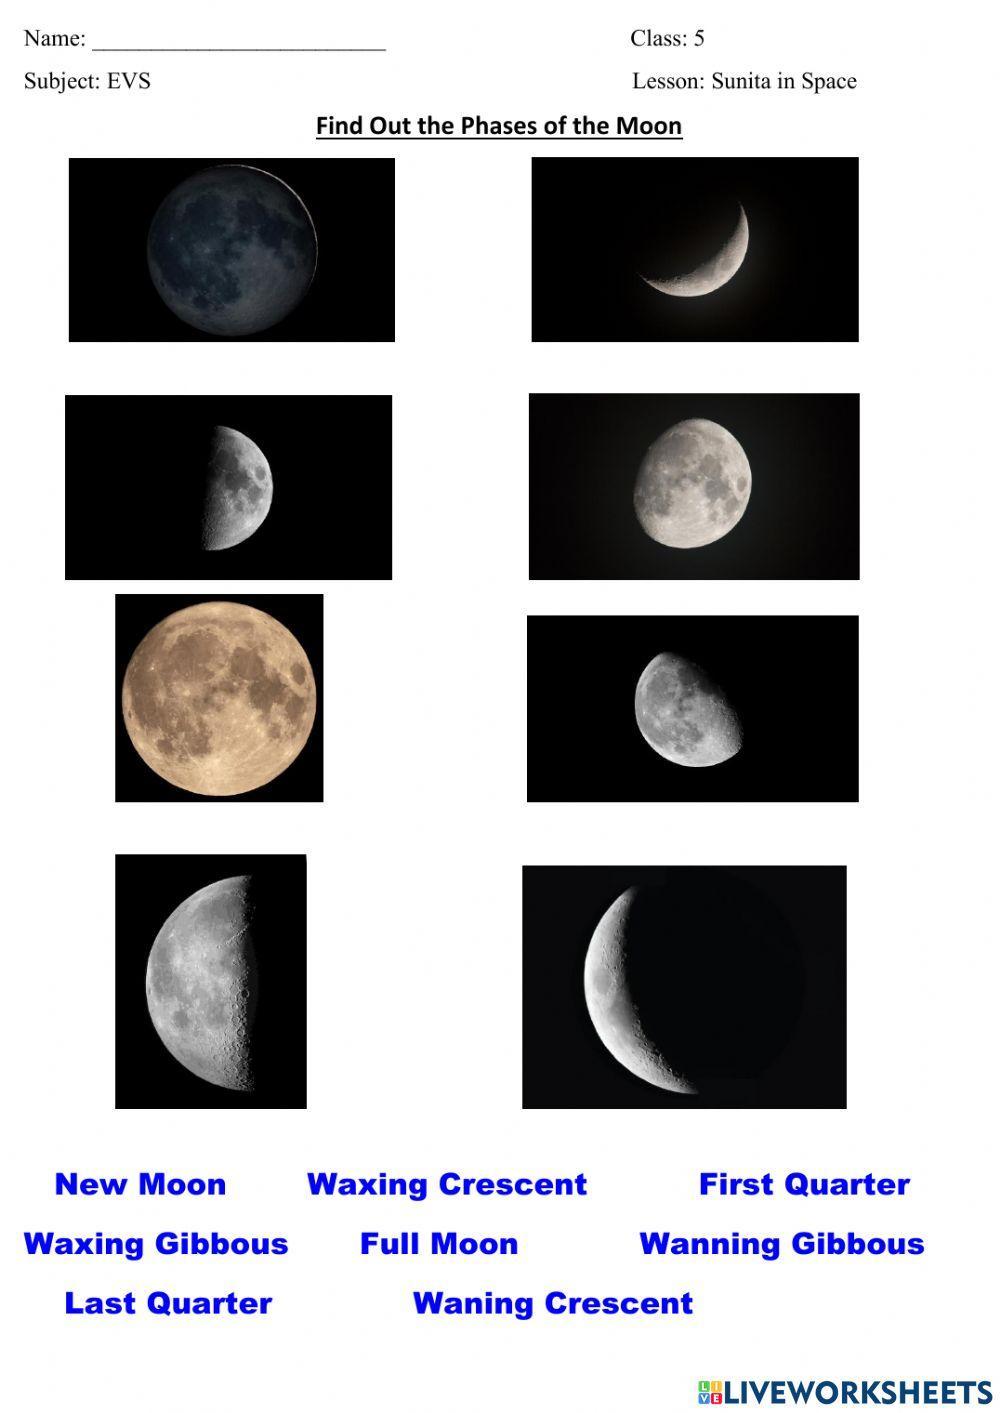 Find out the phases of the moon